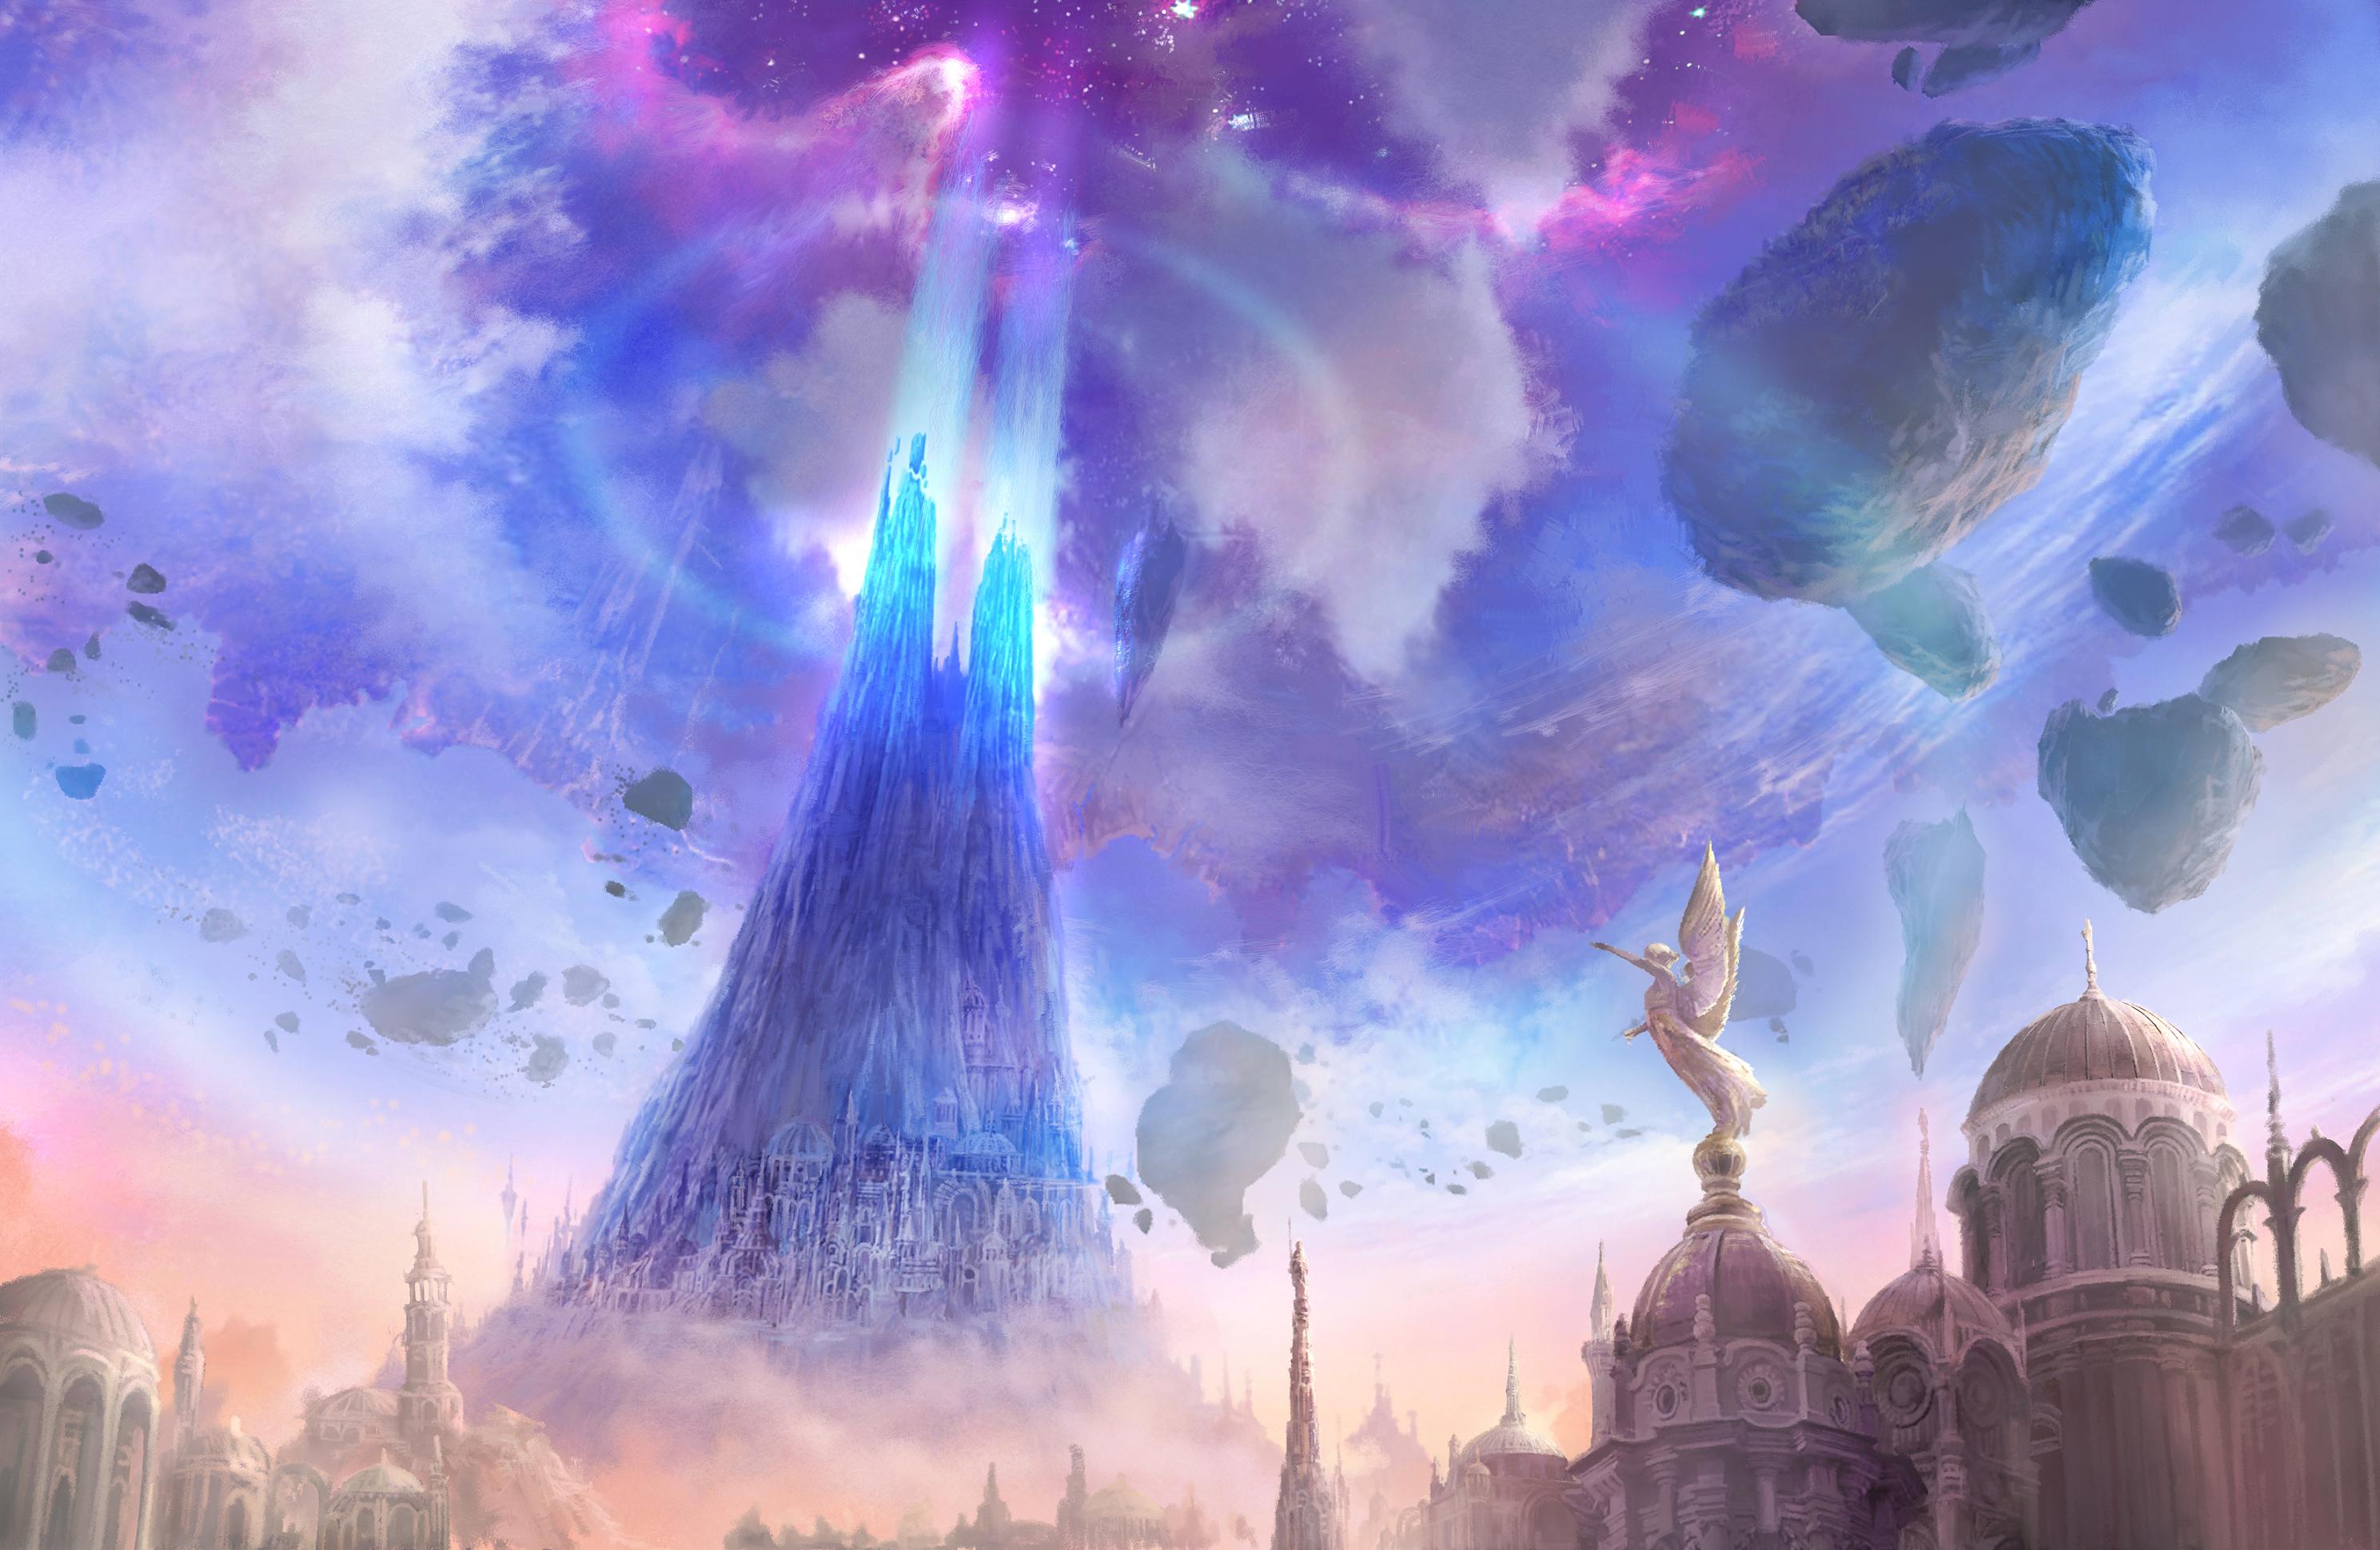 Aion Wallpapers